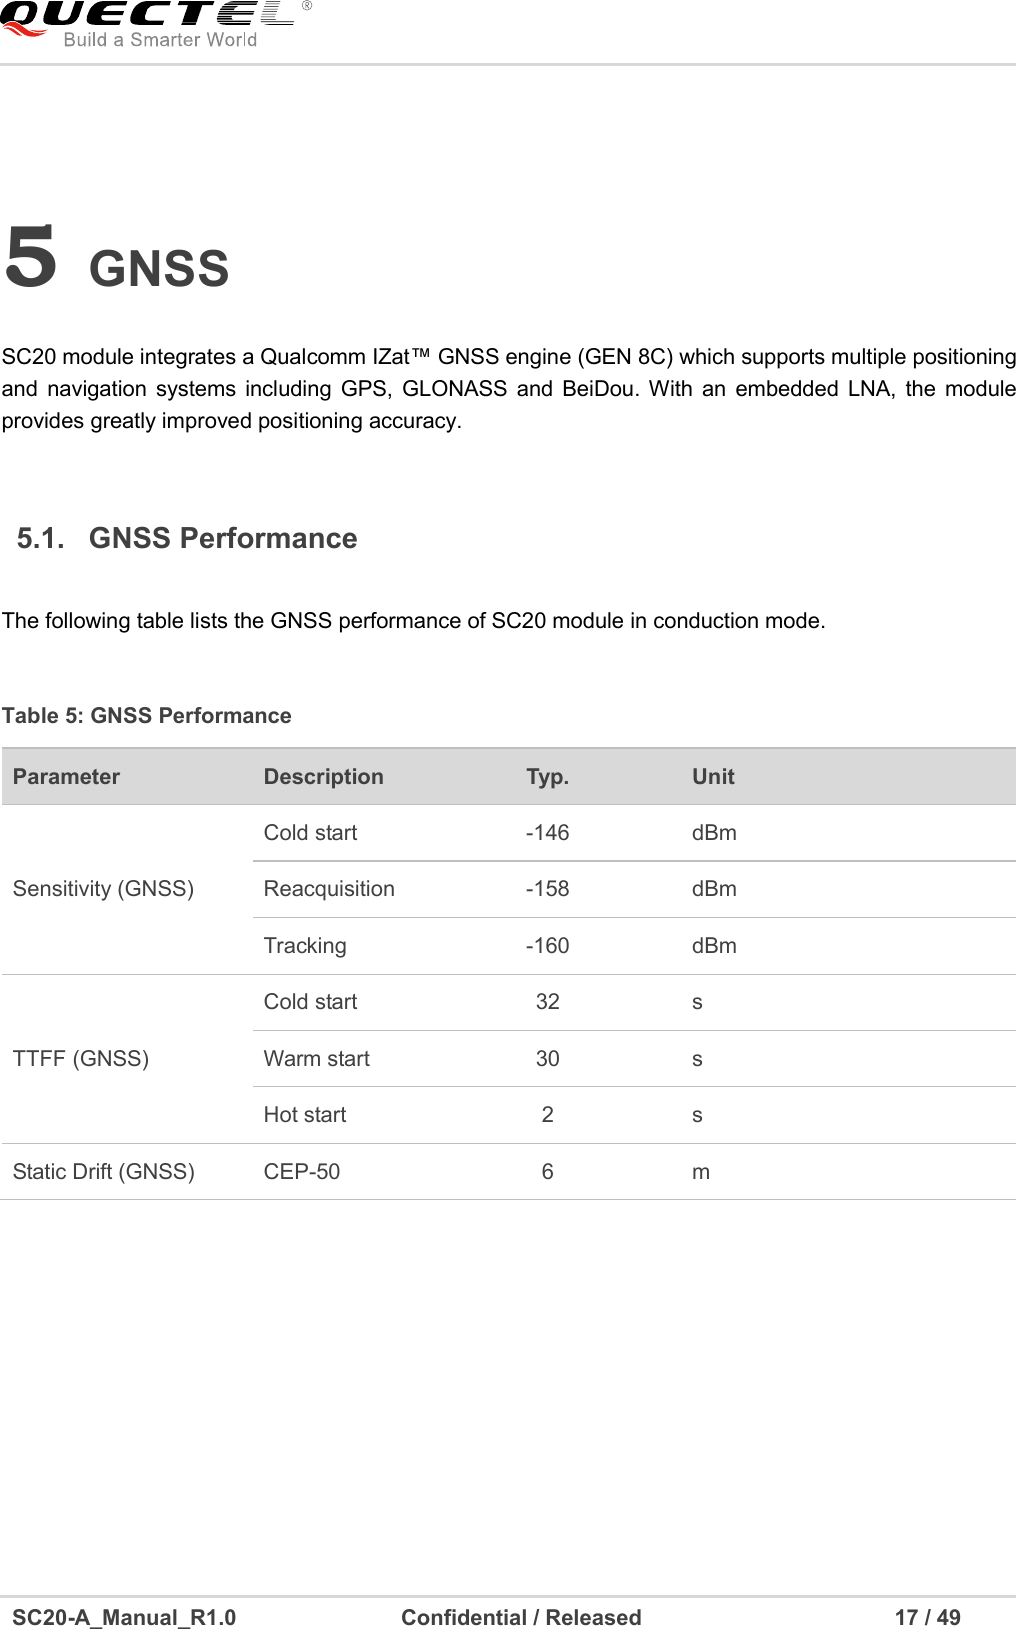     SC20-A_Manual_R1.0                              Confidential / Released                                              17 / 49    5 GNSS   5.1.  GNSS Performance   Table 5: GNSS Performance Parameter  Description  Typ.  Unit Sensitivity (GNSS) Cold start  -146  dBm Reacquisition  -158  dBm Tracking  -160  dBm TTFF (GNSS) Cold start  32  s Warm start  30  s Hot start  2  s Static Drift (GNSS)  CEP-50  6  m  SC20 module integrates a Qualcomm IZat™ GNSS engine (GEN 8C) which supports multiple positioning and  navigation  systems  including GPS, GLONASS  and BeiDou. With  an  embedded LNA, the  module provides greatly improved positioning accuracy.     The following table lists the GNSS performance of SC20 module in conduction mode.   